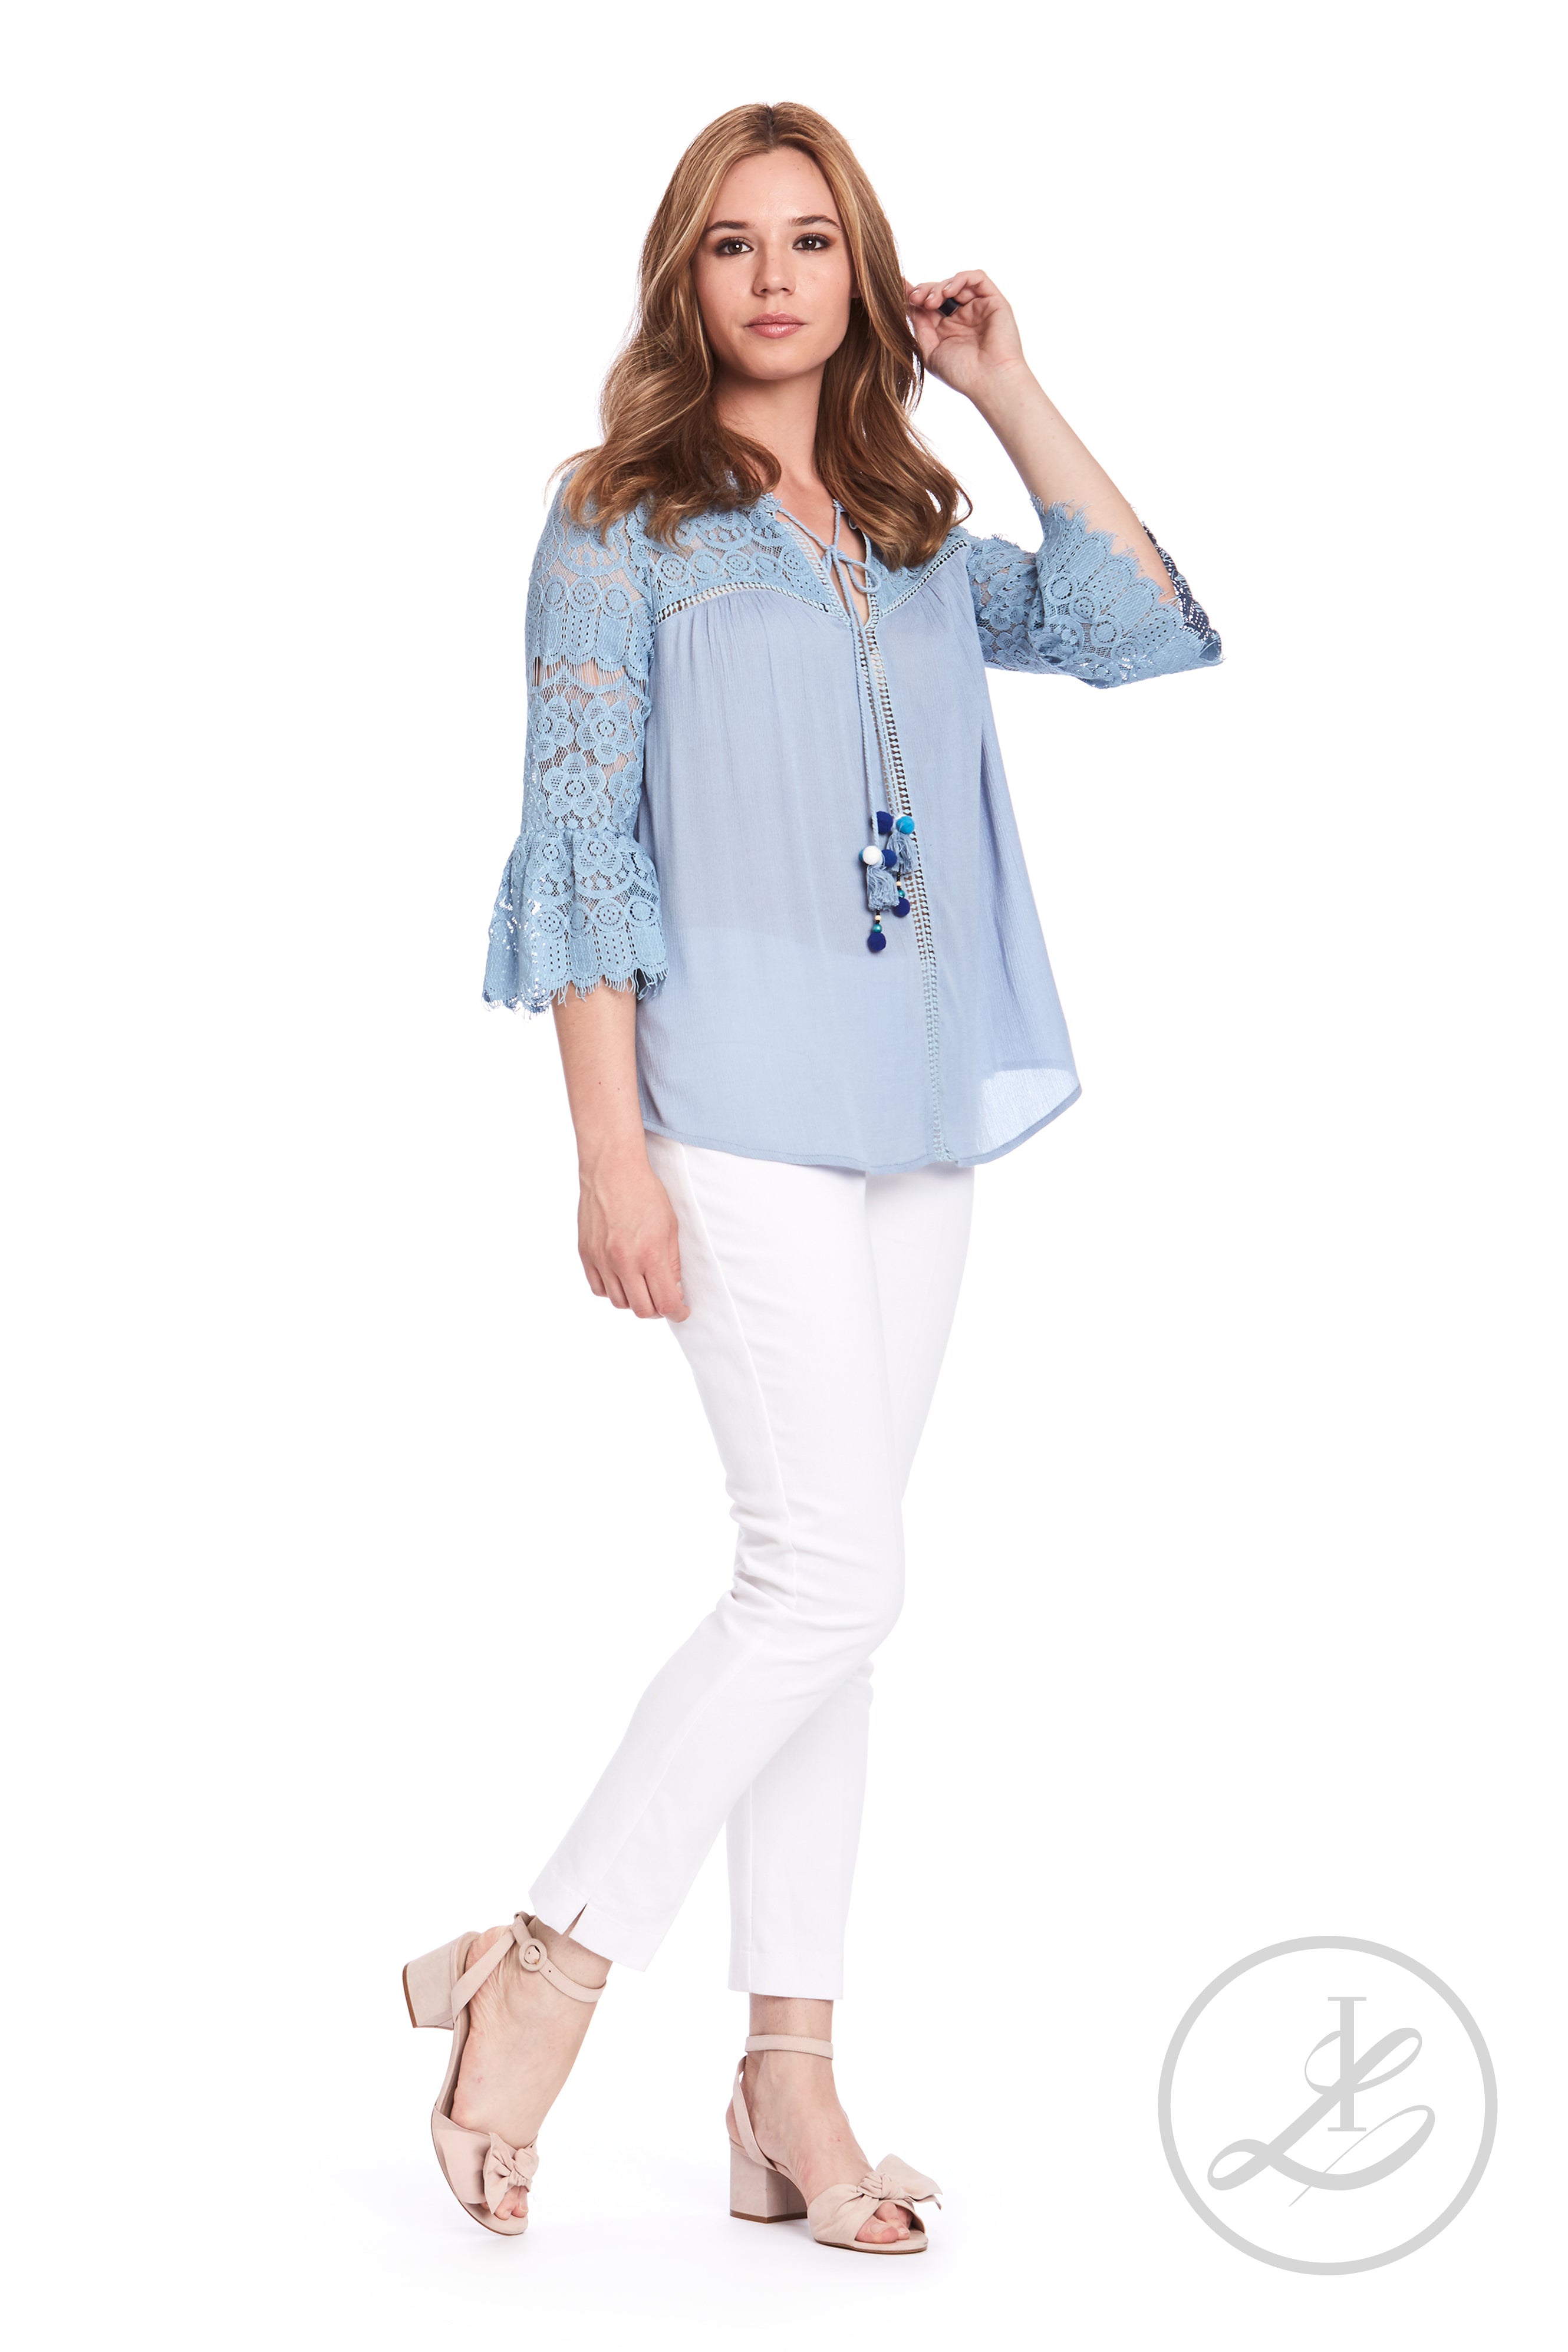 IL81035 (Pullover Top Only)  50% Off